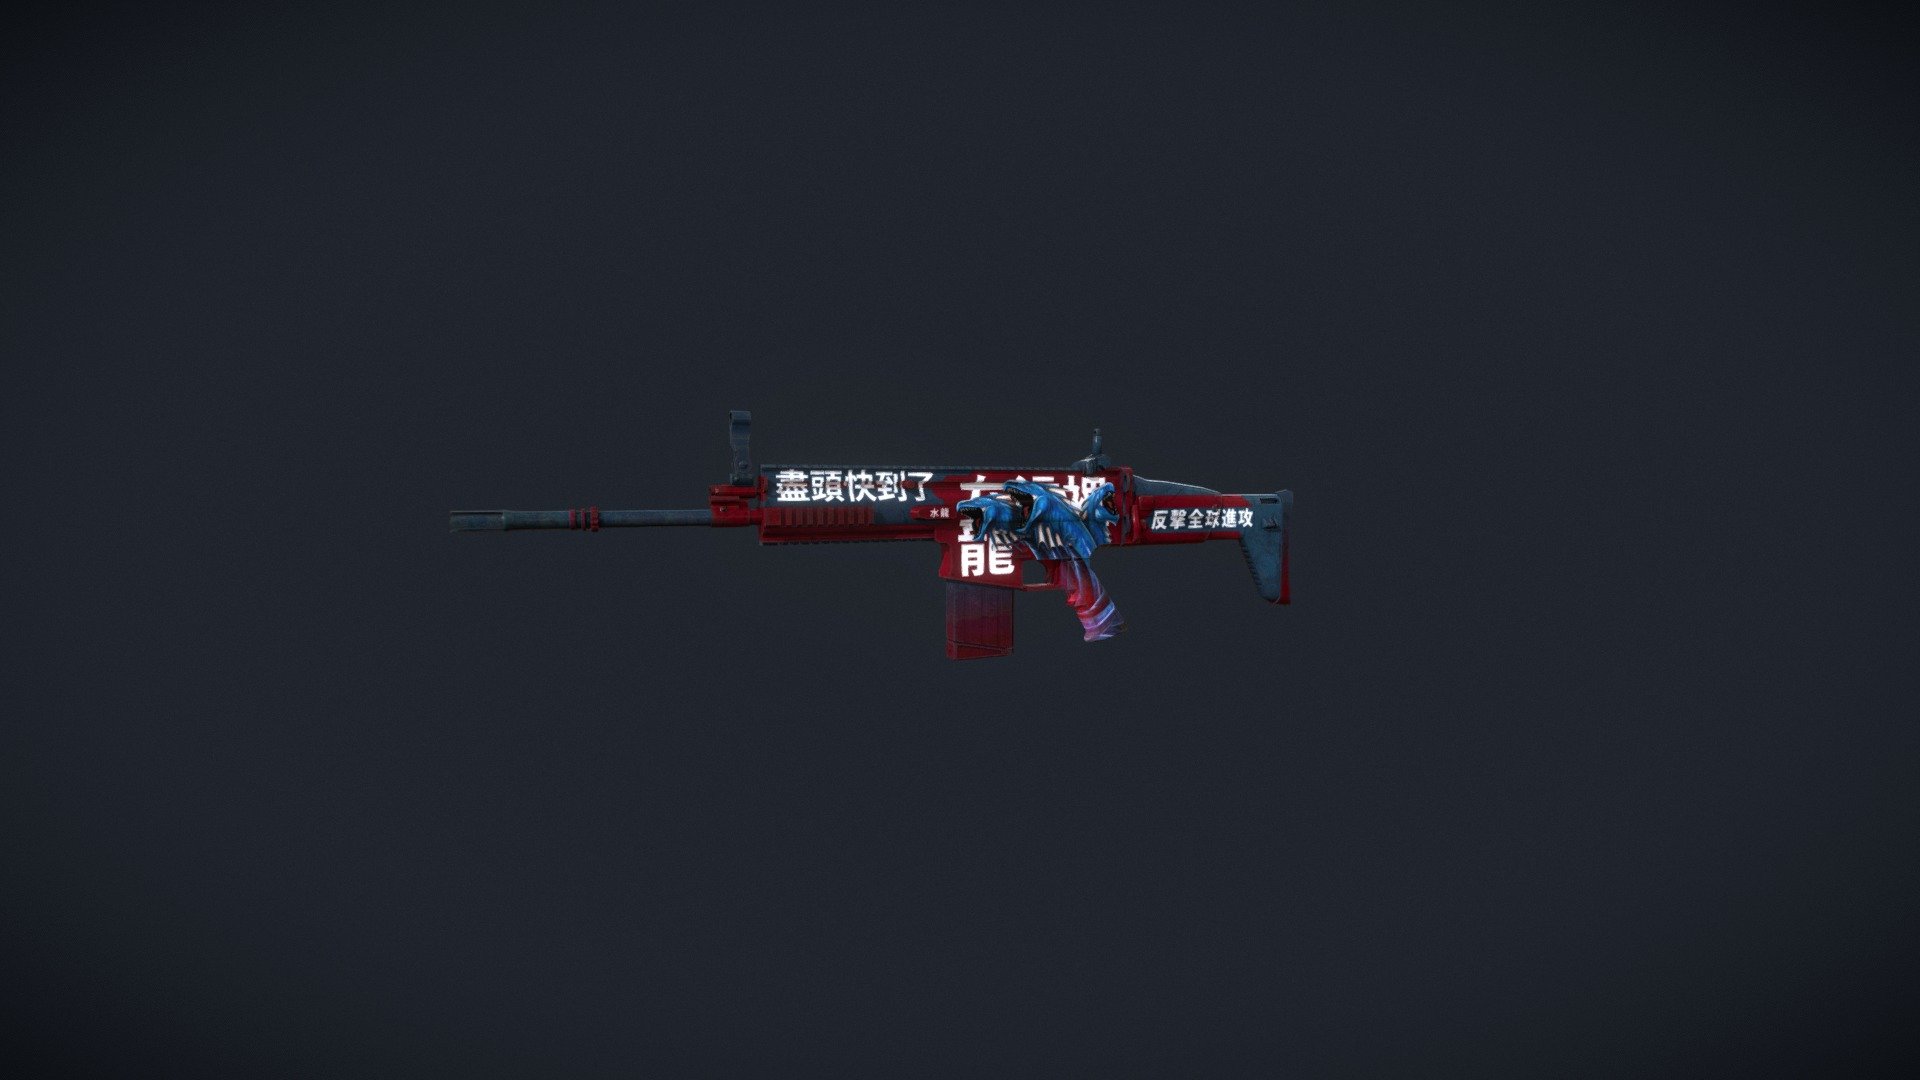 a csgo/vgo weapon skin design made by @2DKovex and @vvookz (on twitter) - Scar-H | Shuilong - 3D model by vvookz 3d model